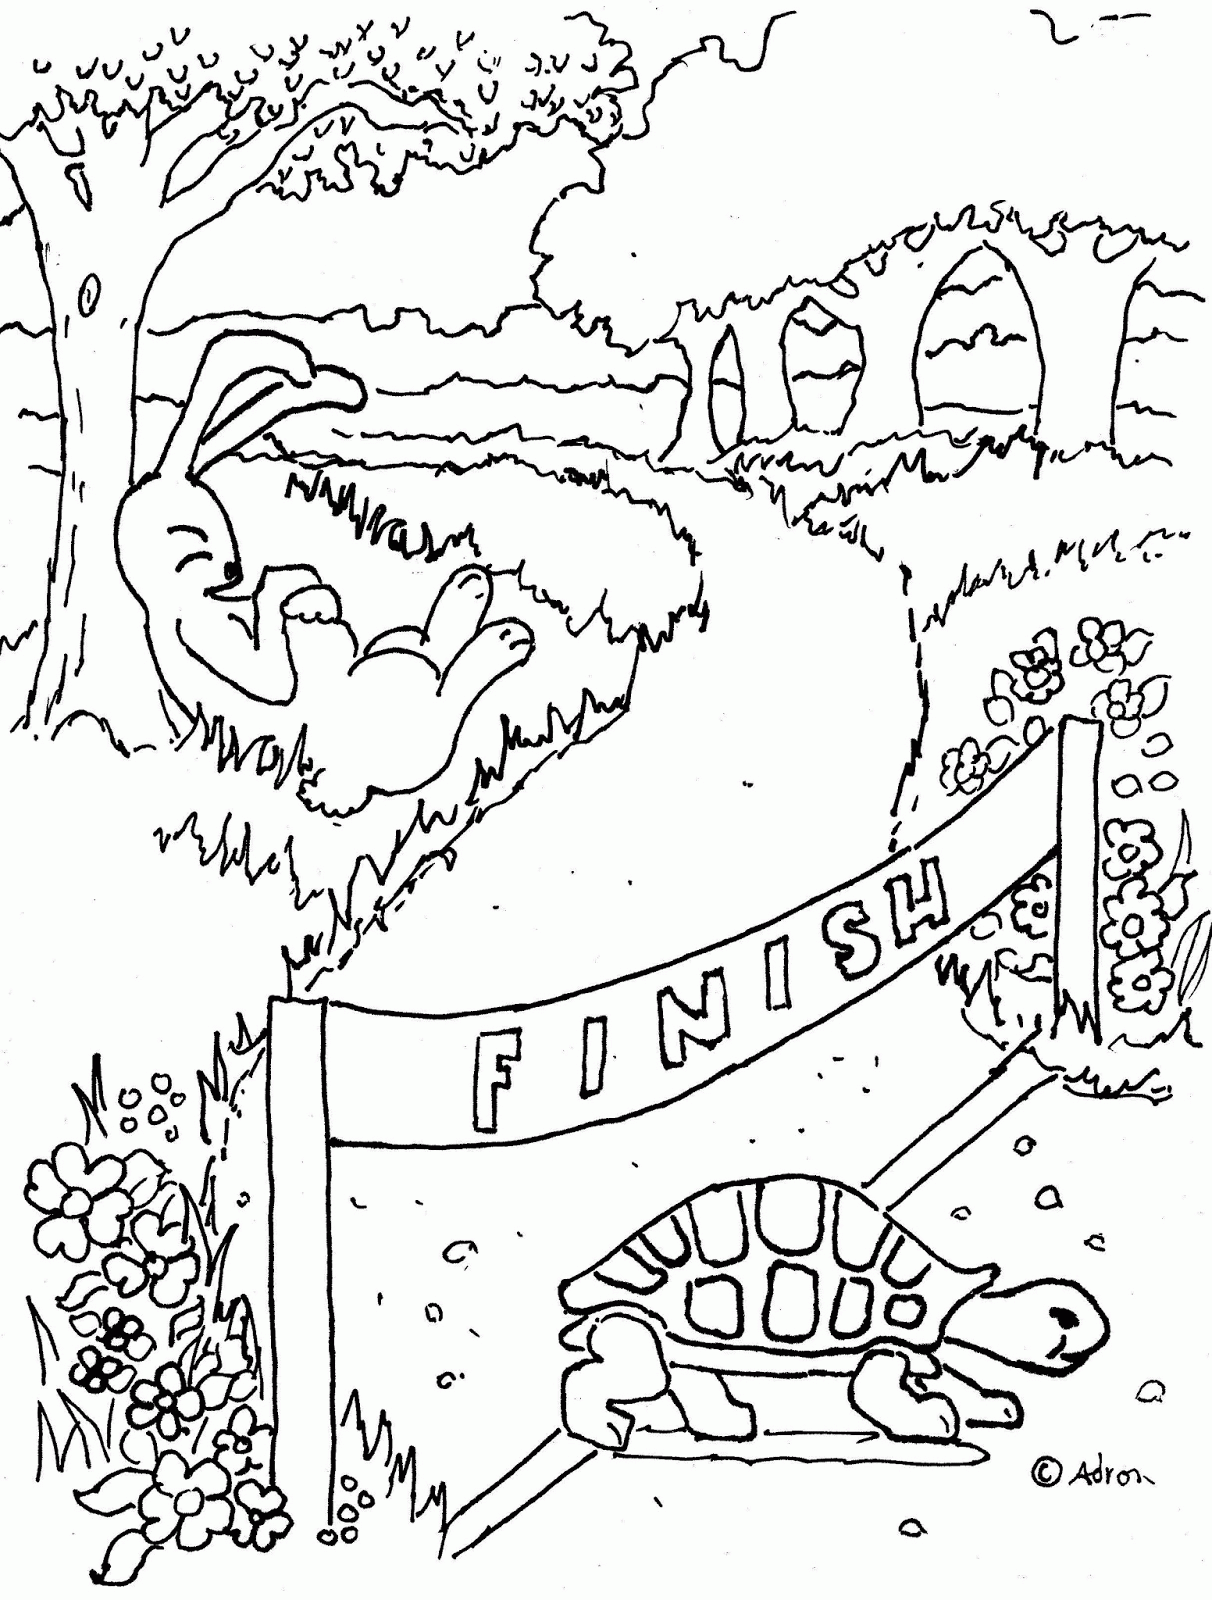 Coloring Pages for Kids by Mr. Adron: Tortoise And The Hare Print ...